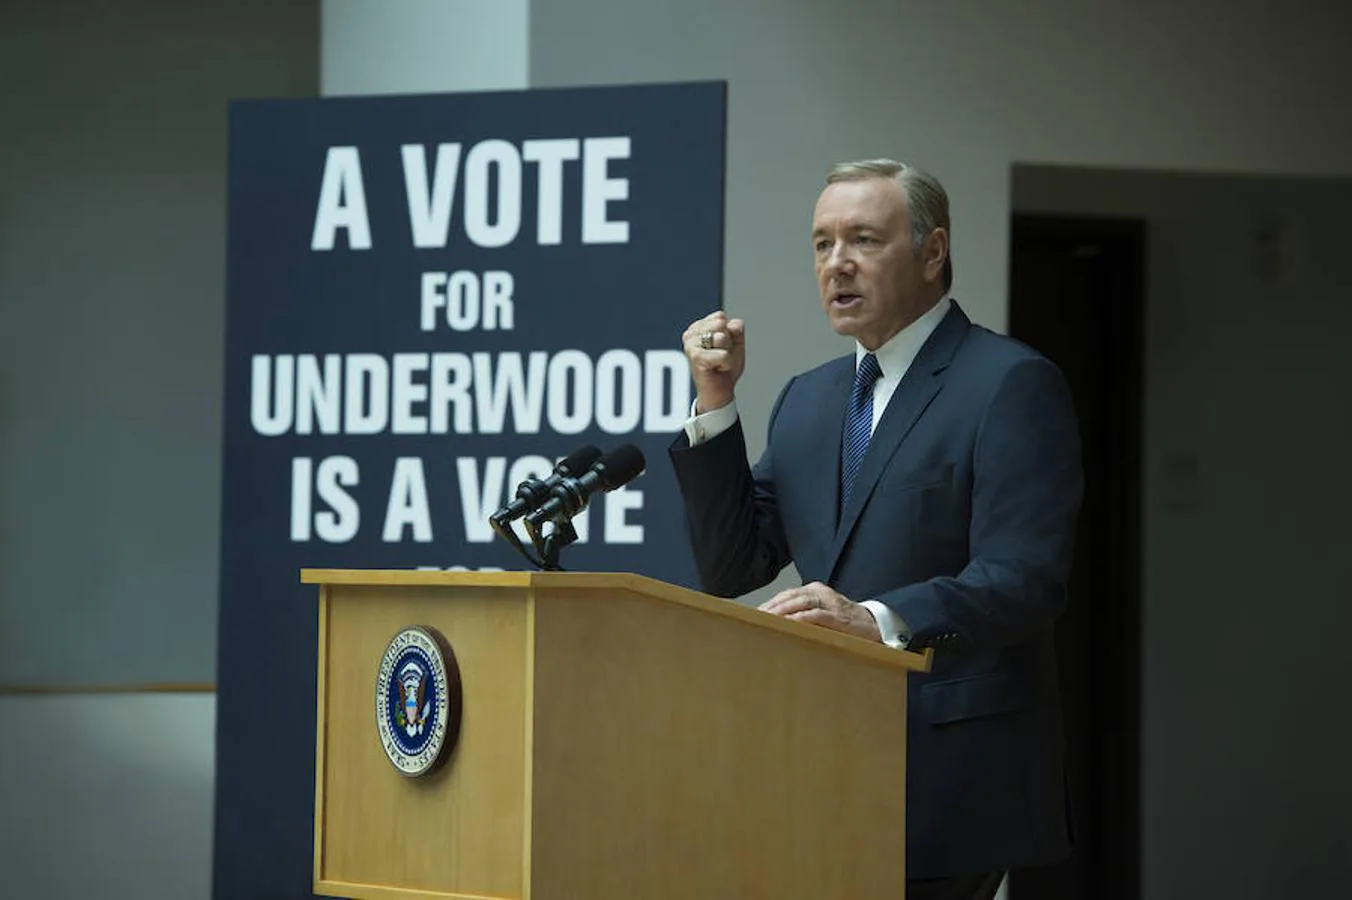 Kevin Spacey («House of Cards»). Mejor actor protagonista de drama.